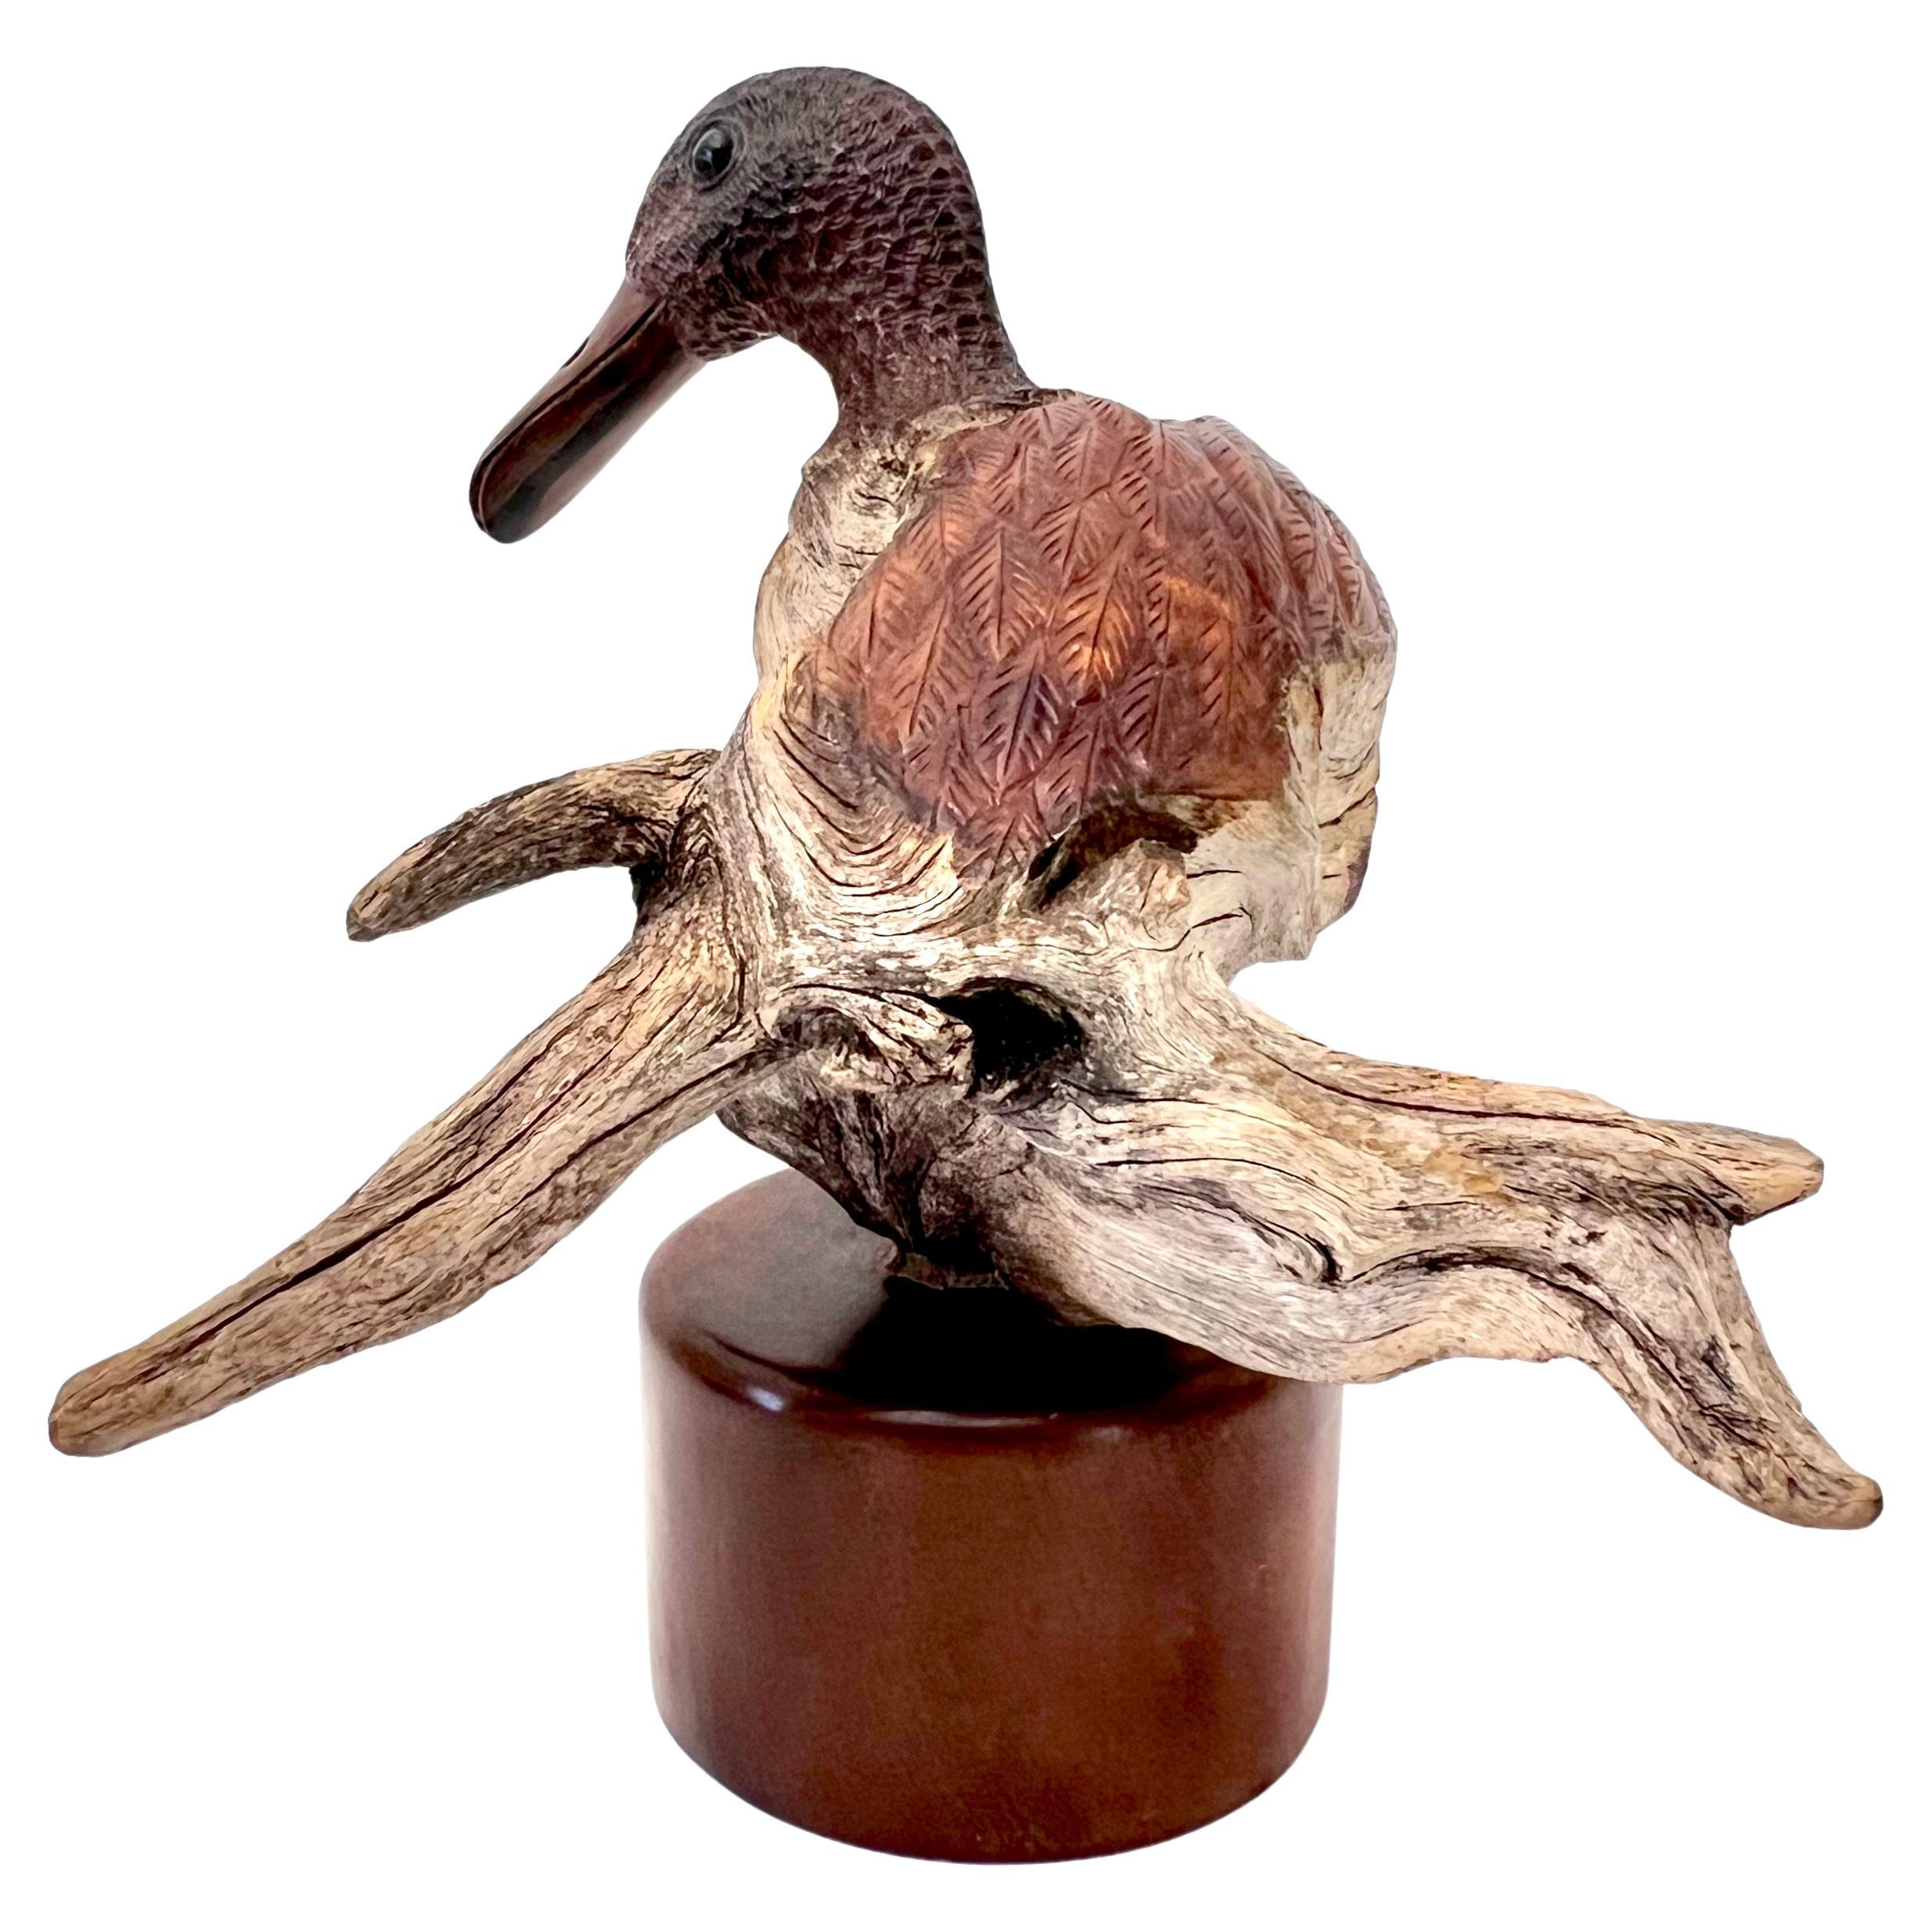 Stunning artisan hand carved duck out of driftwood.  Beautifully crafted with a mix of the raw and the refined.  Photos of this do not do it justice.  For duck lovers this is a masterful and artistic sculpture.
It sits on a beautiful smooth wood